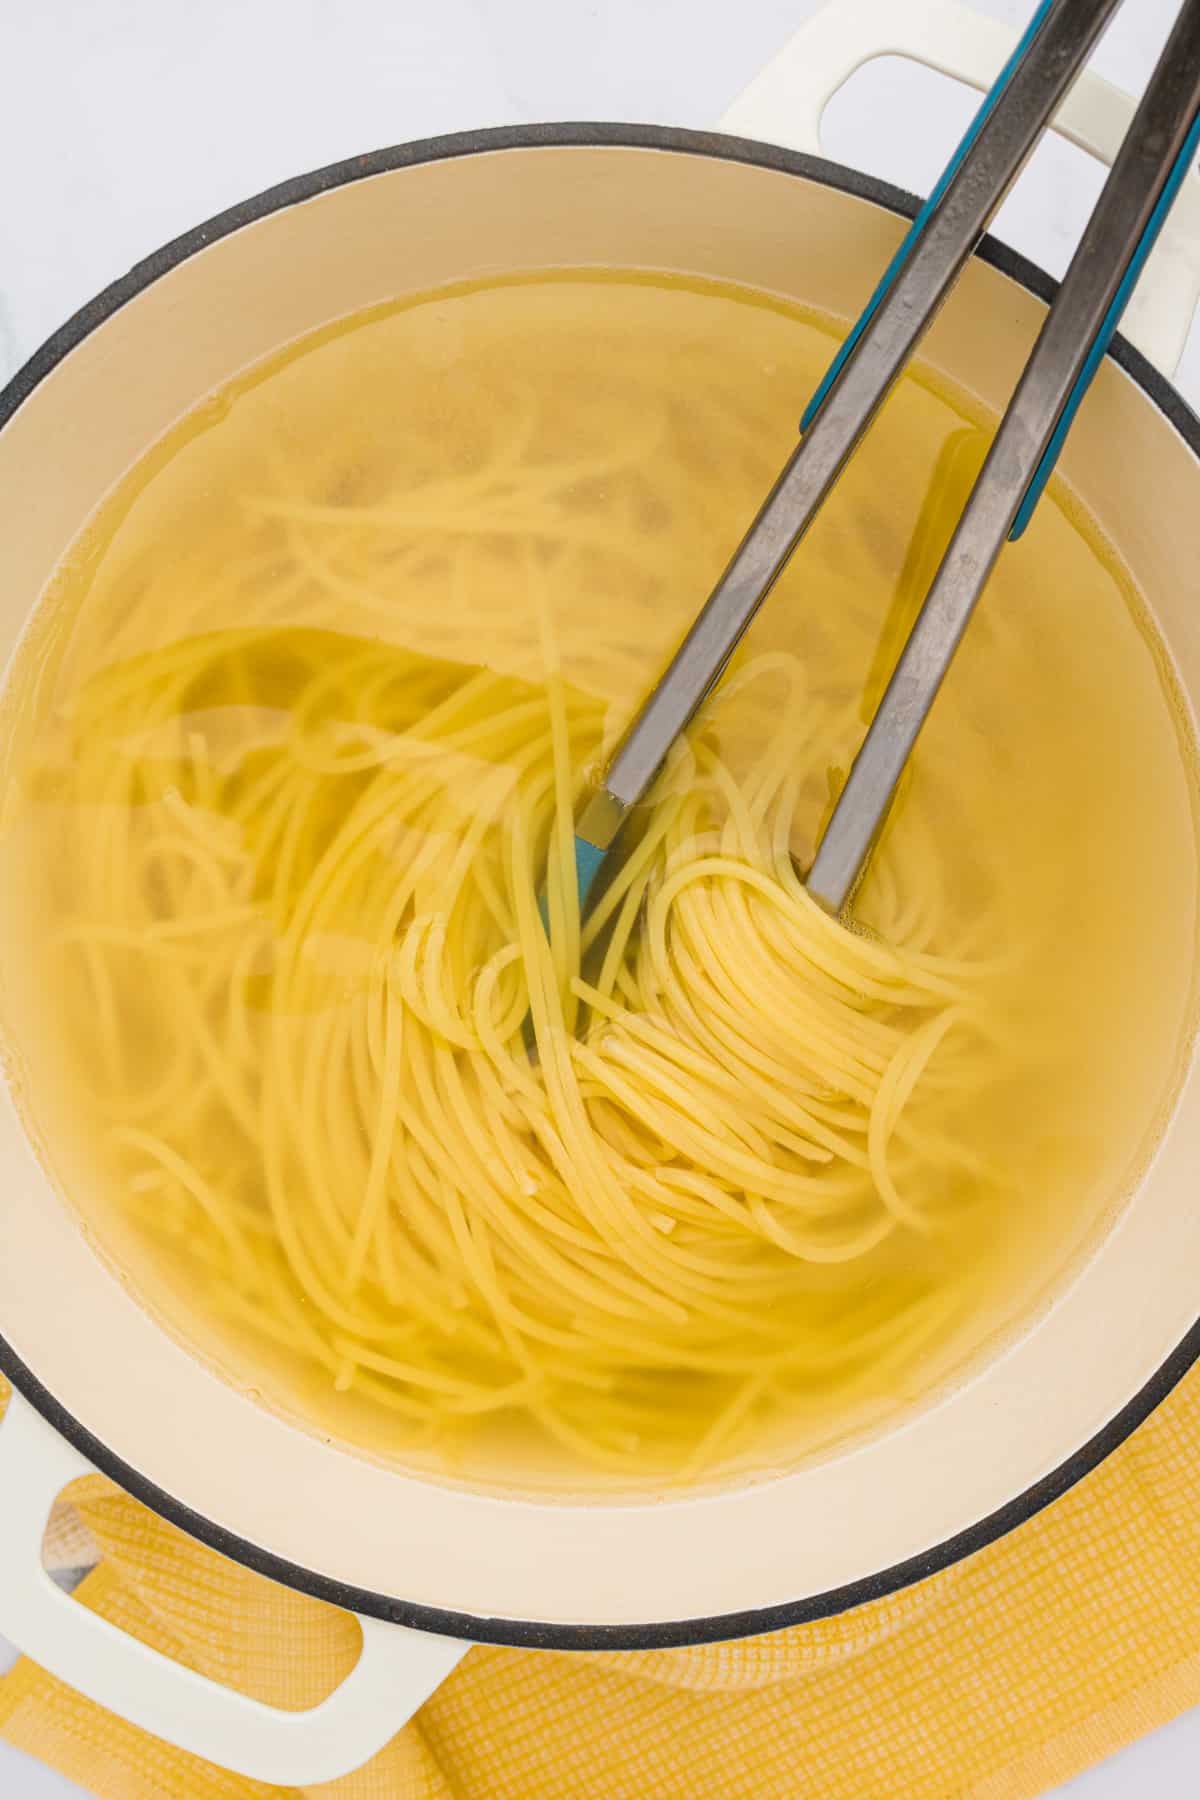 Spaghetti noodles in a 2-handled pot with tongs twirled into the noodles.